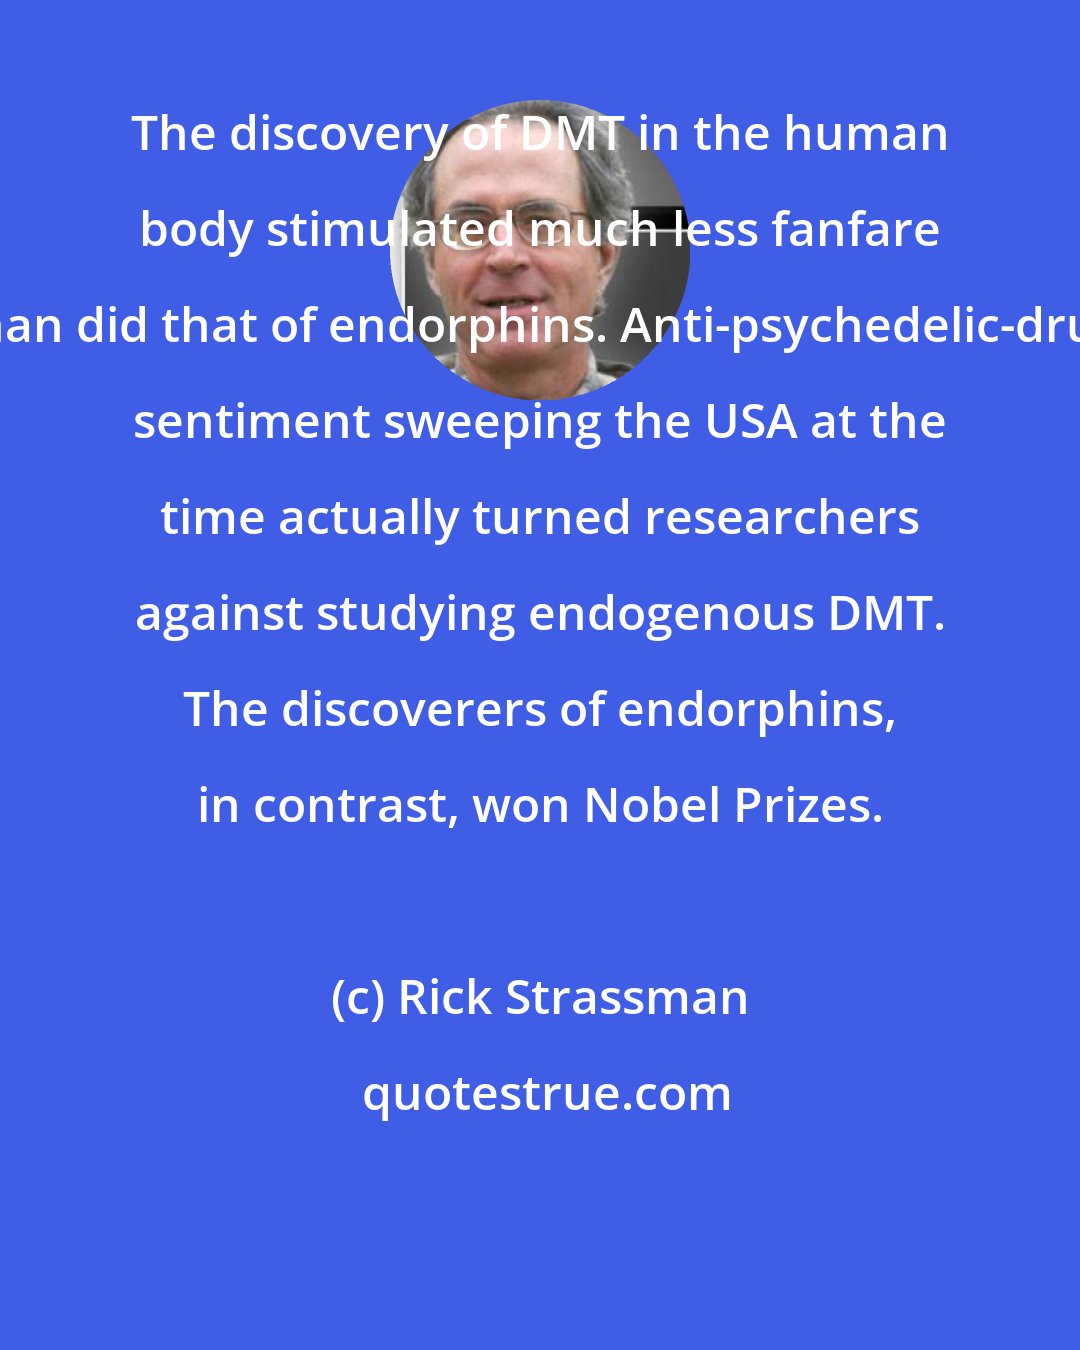 Rick Strassman: The discovery of DMT in the human body stimulated much less fanfare than did that of endorphins. Anti-psychedelic-drug sentiment sweeping the USA at the time actually turned researchers against studying endogenous DMT. The discoverers of endorphins, in contrast, won Nobel Prizes.